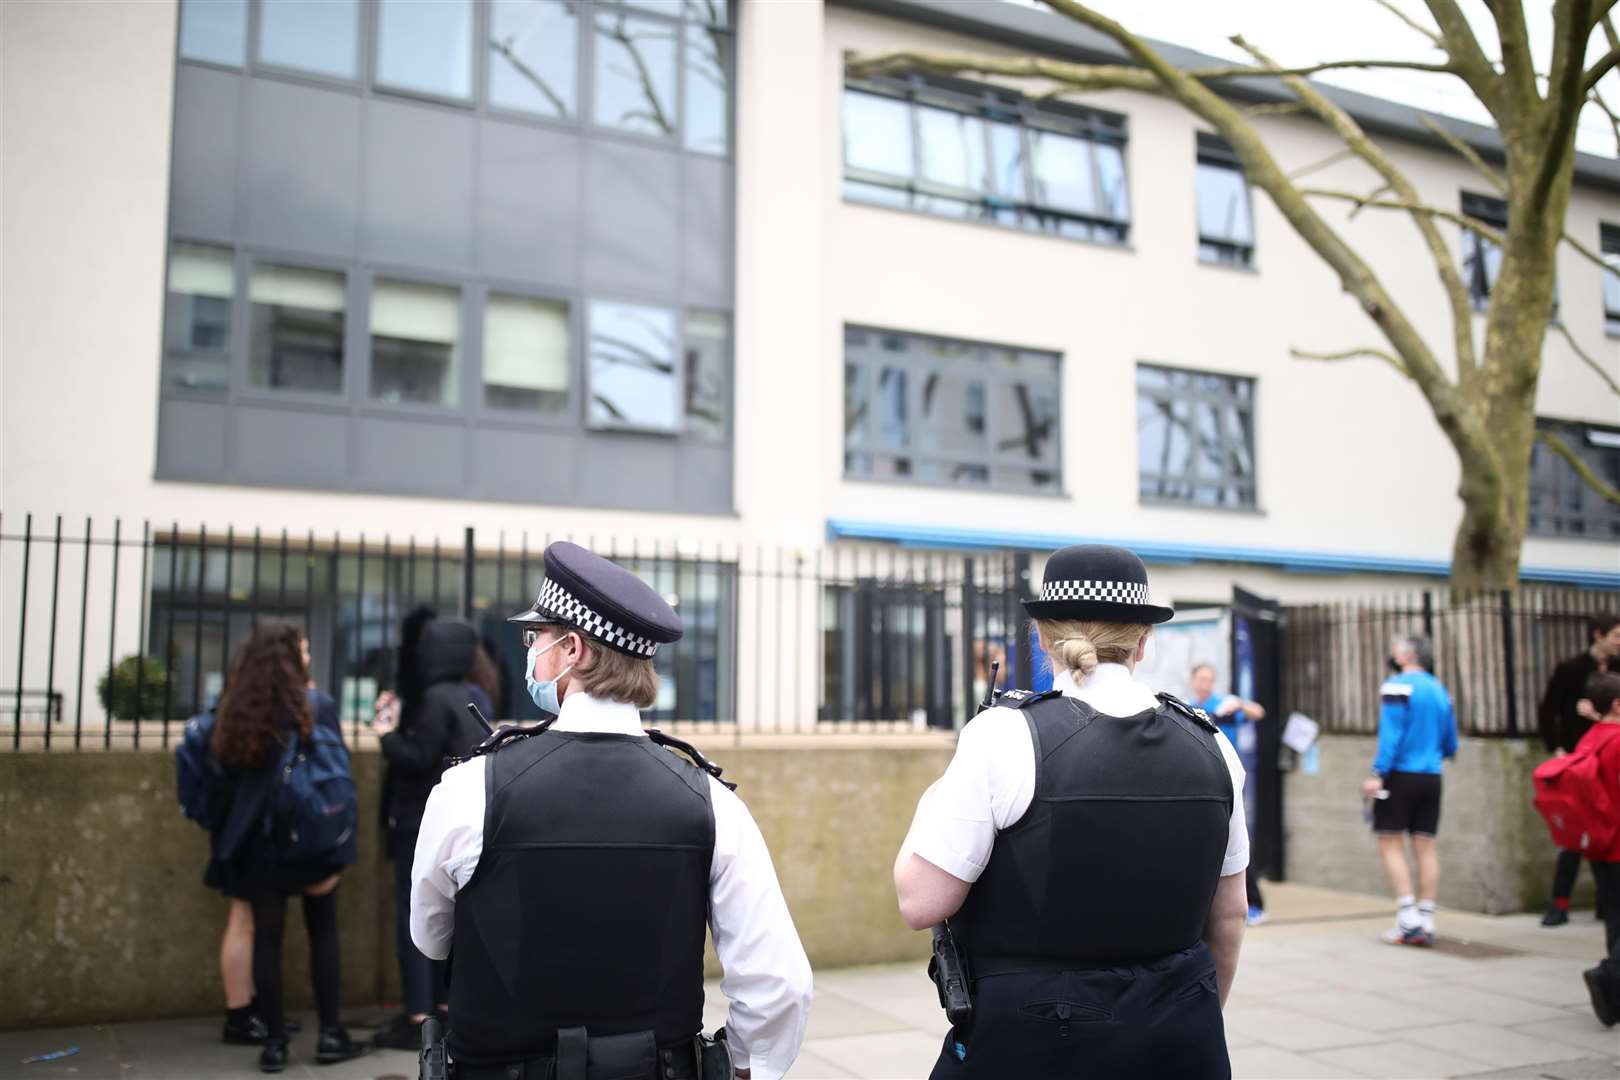 Police officers outside Pimlico Academy after pupils walked out early (Aaron Chown/PA)